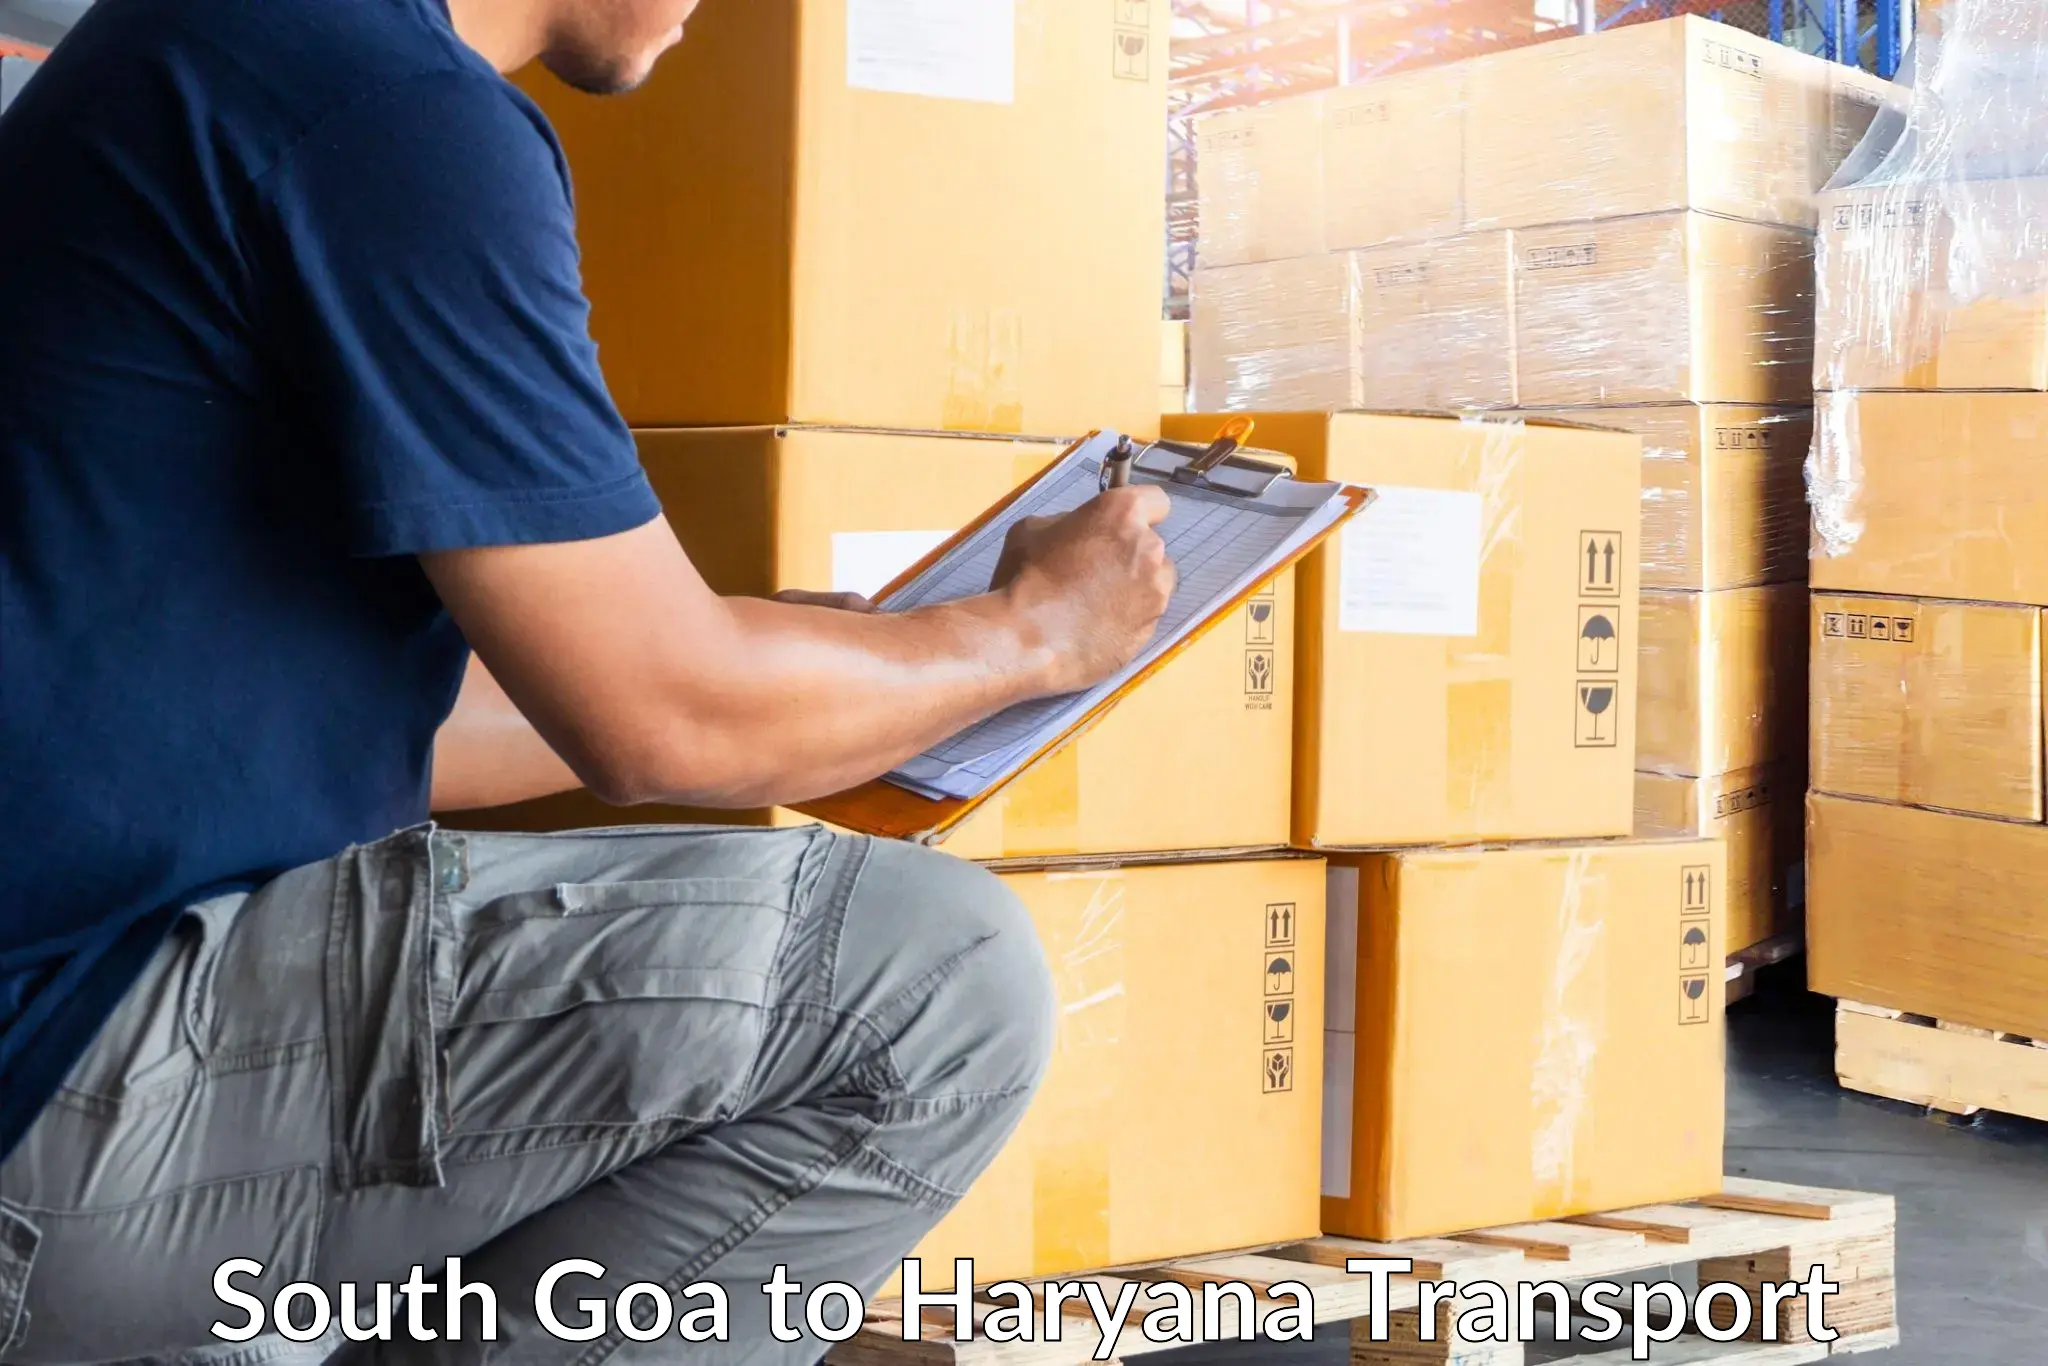 Truck transport companies in India South Goa to Bhiwani